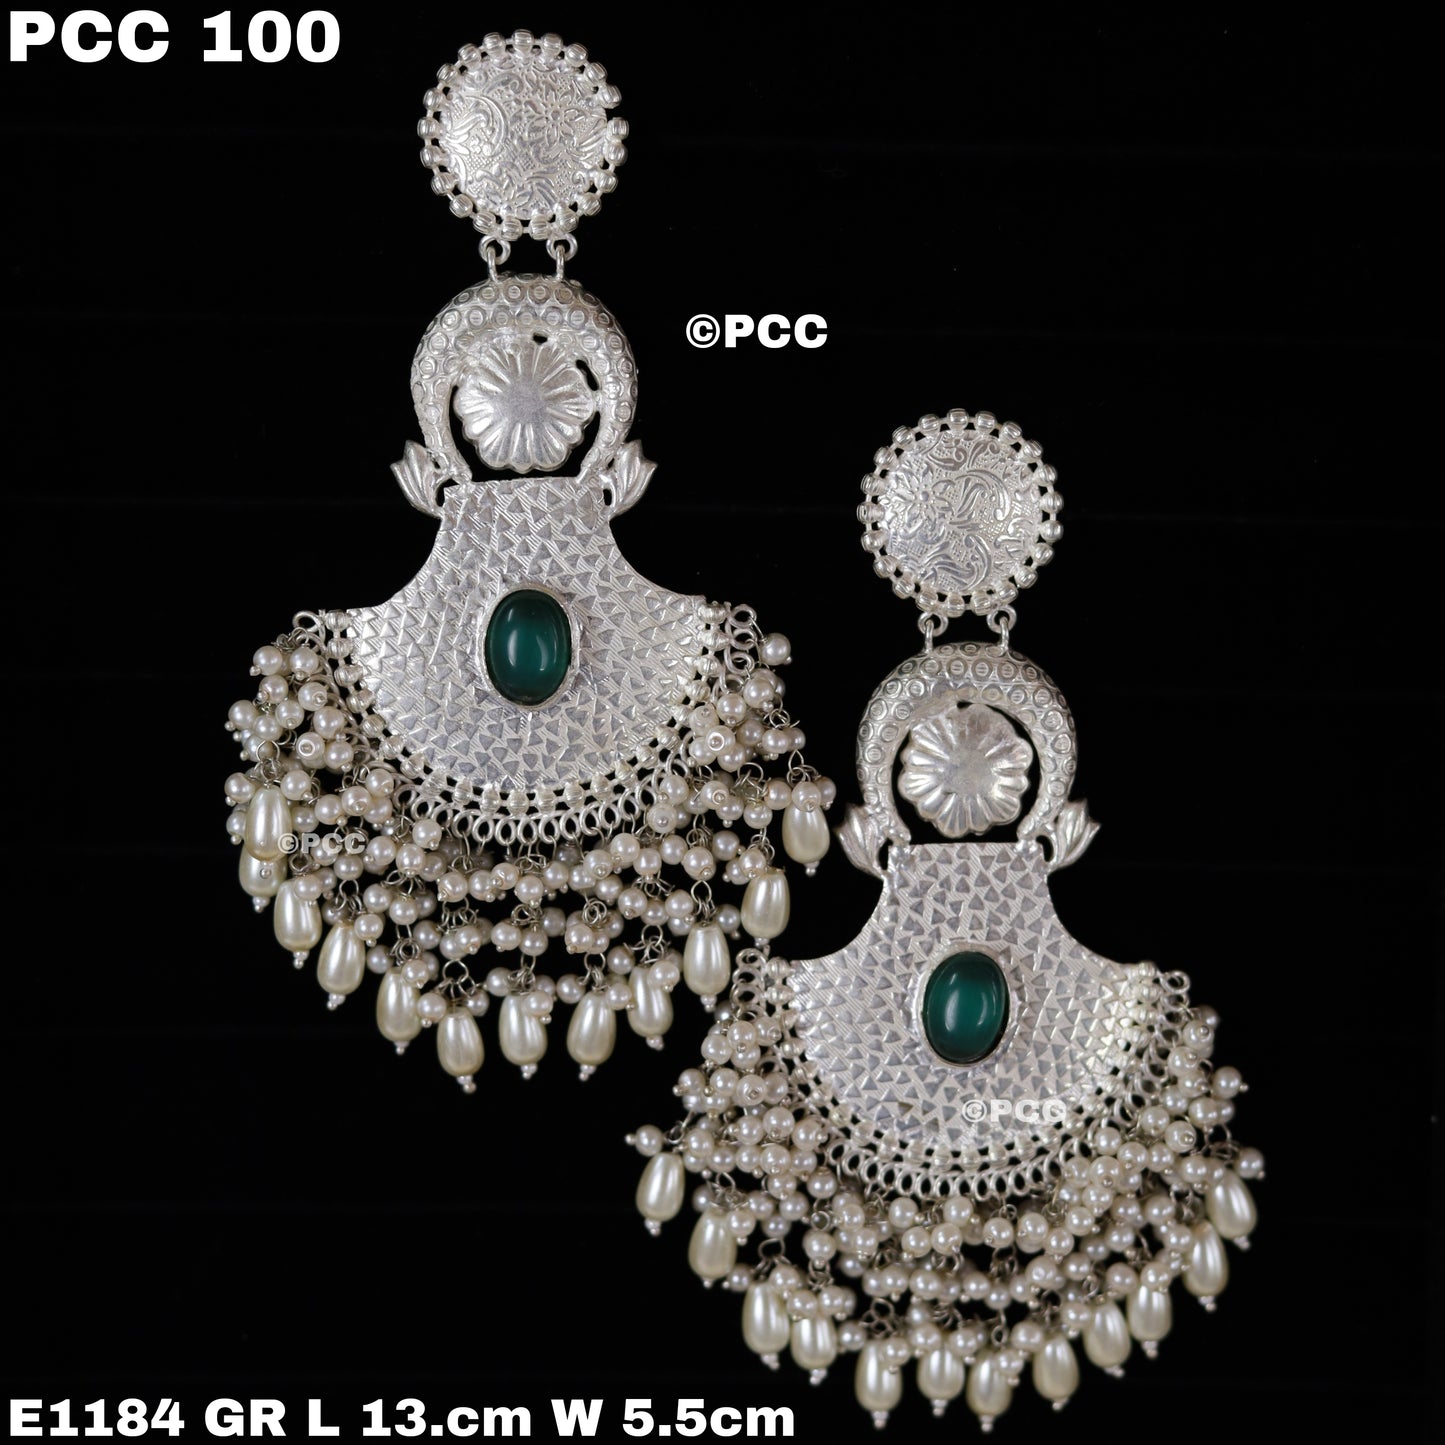 TRADITIONAL STYLE OXIDIZED EARRINGS